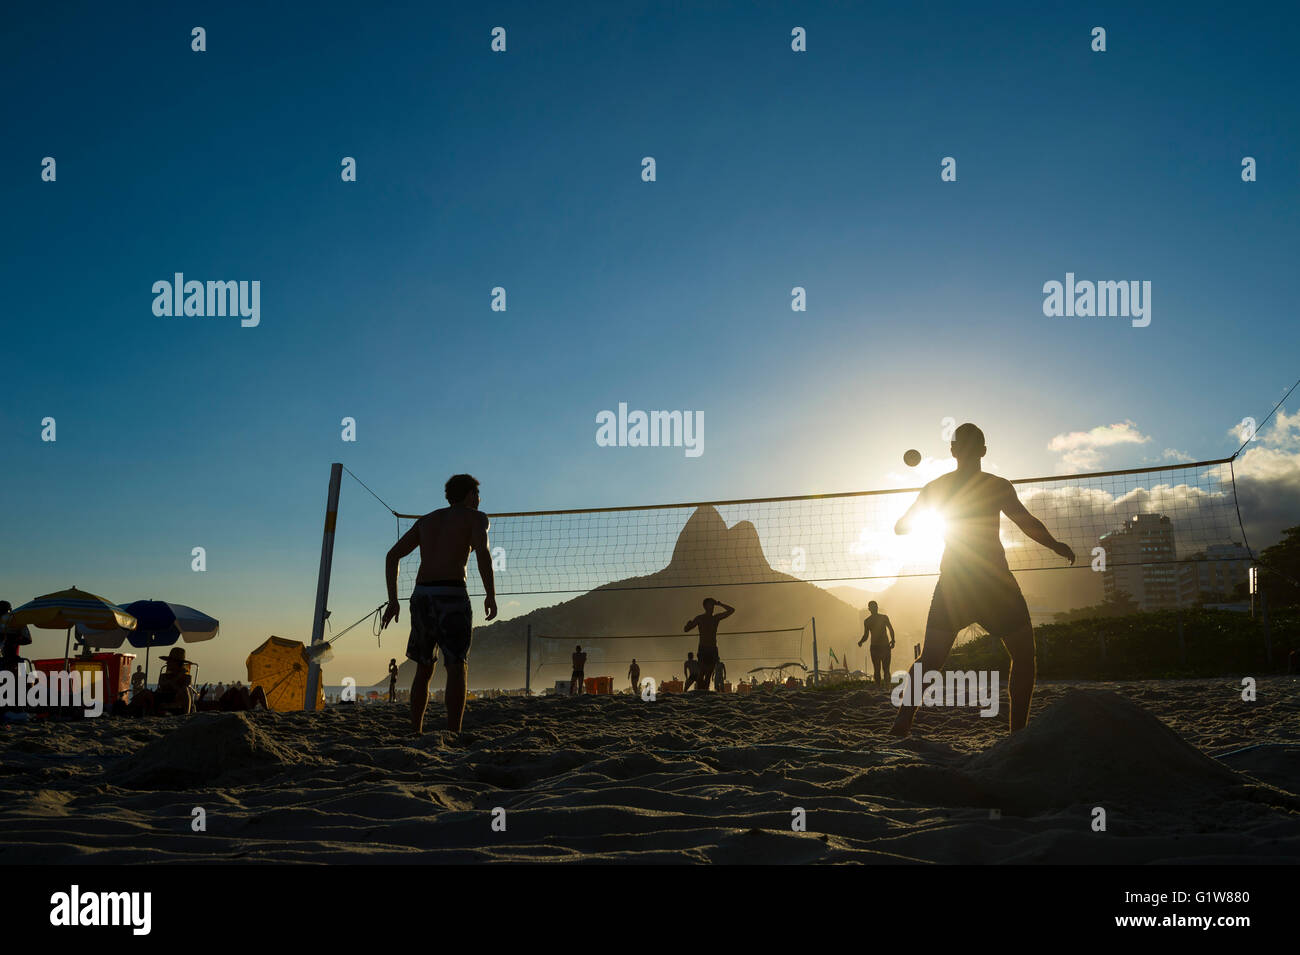 Silhouettes of Brazilians playing futevolei (footvolley) against a sunset on Dois Irmaos Two Brothers Mountain on Ipanema Beach Stock Photo